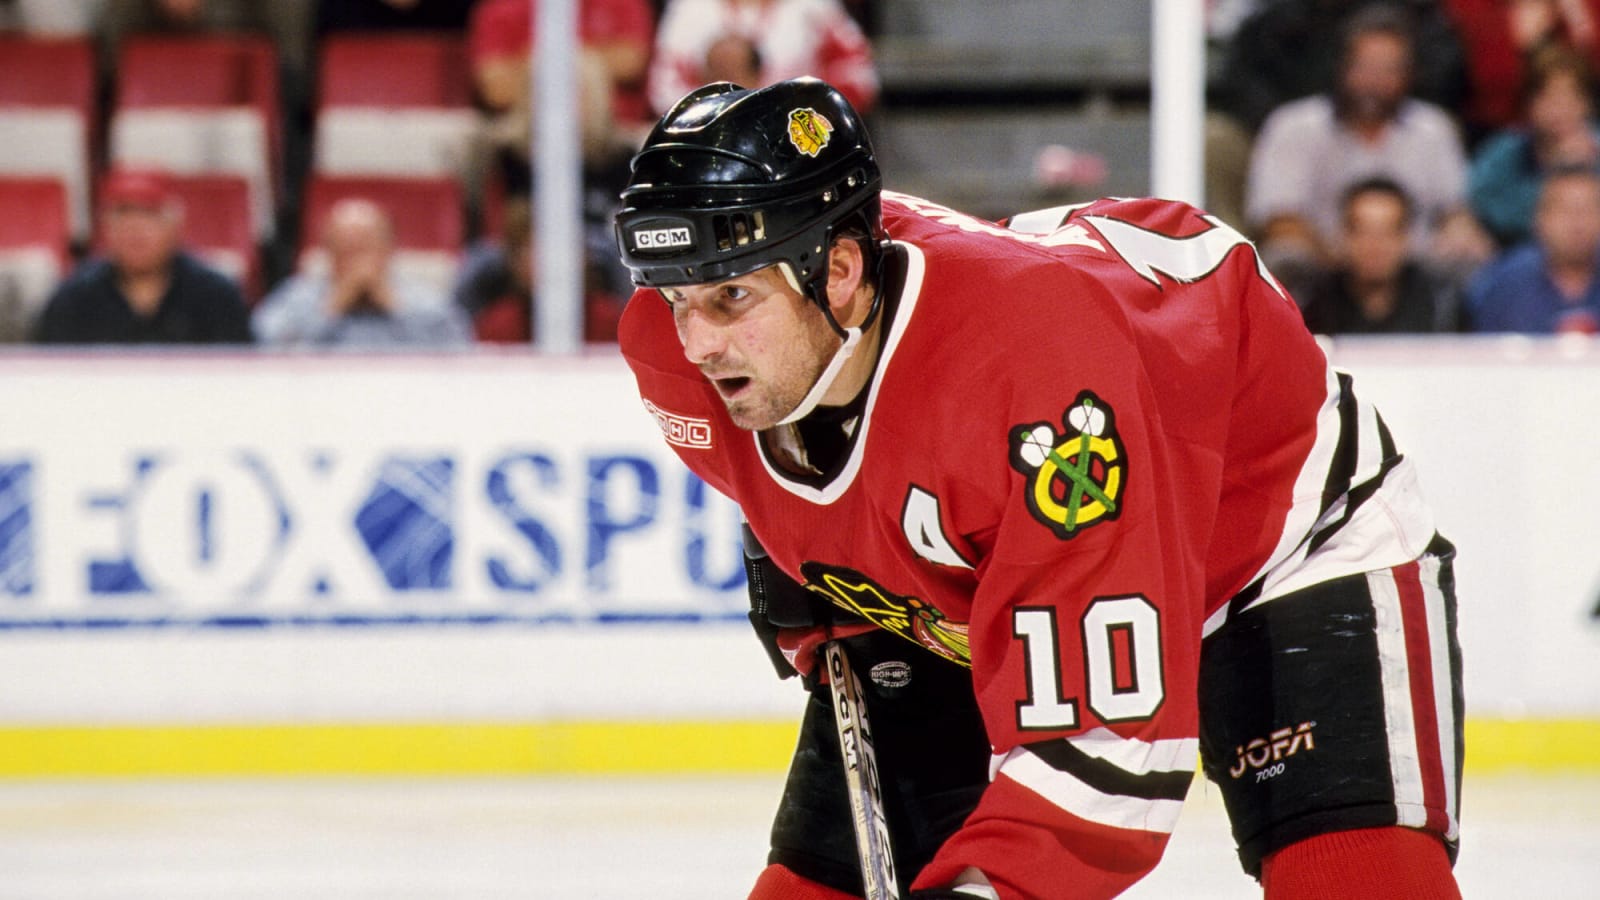 Editor’s Choice: An Ode to Former Blackhawks Star Tony Amonte